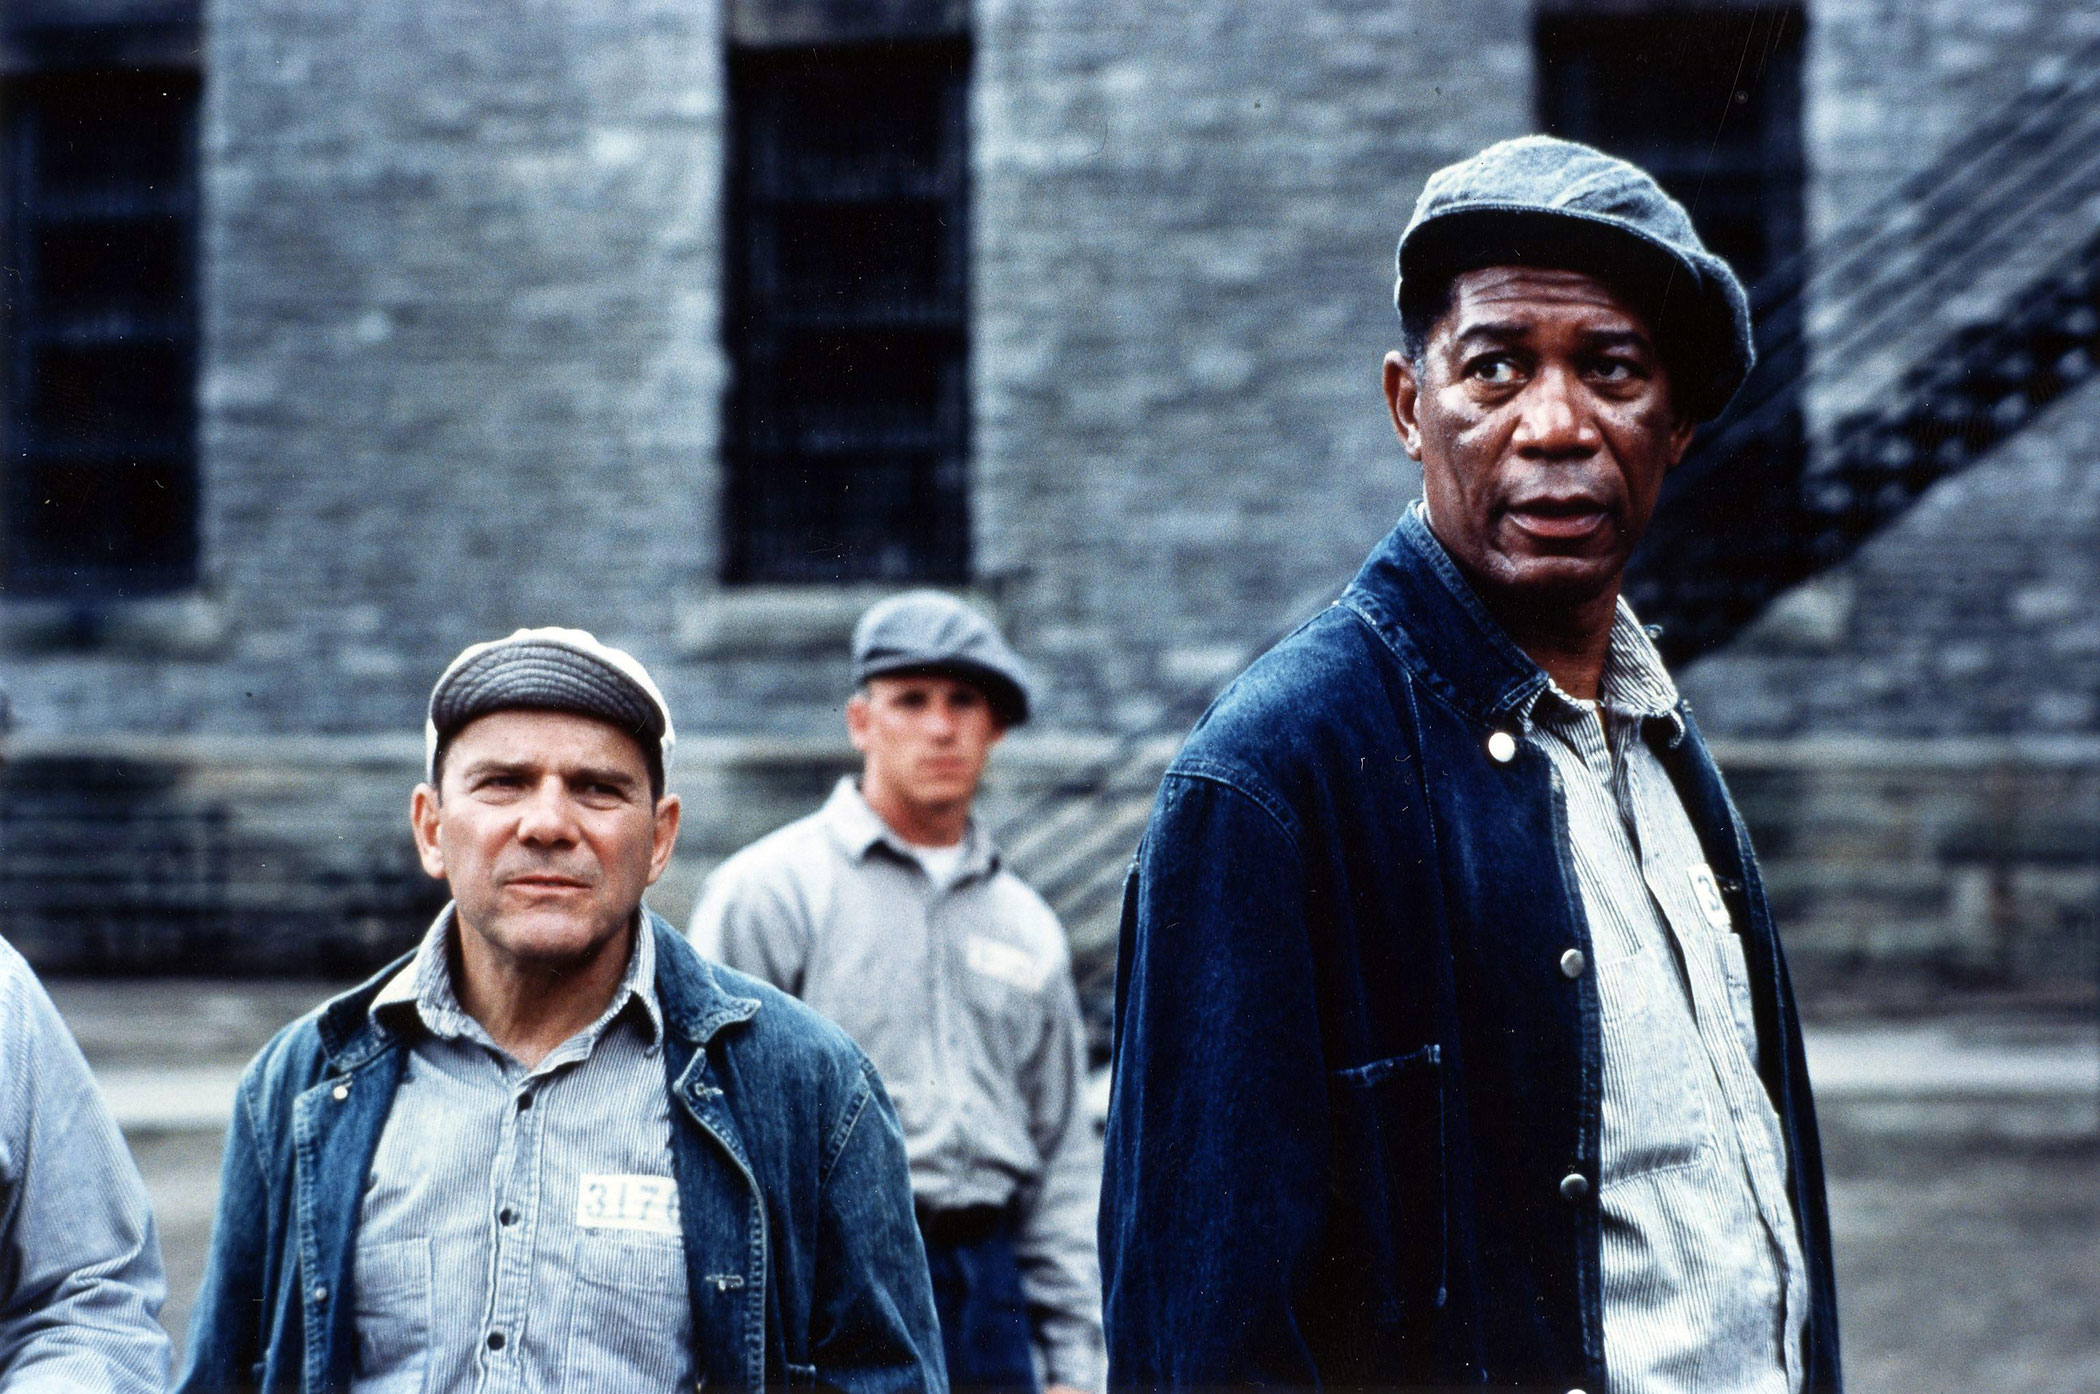 Morgan Freeman's audio was recorded before the movie. Director Frank Darabont would play it during takes for the actors.